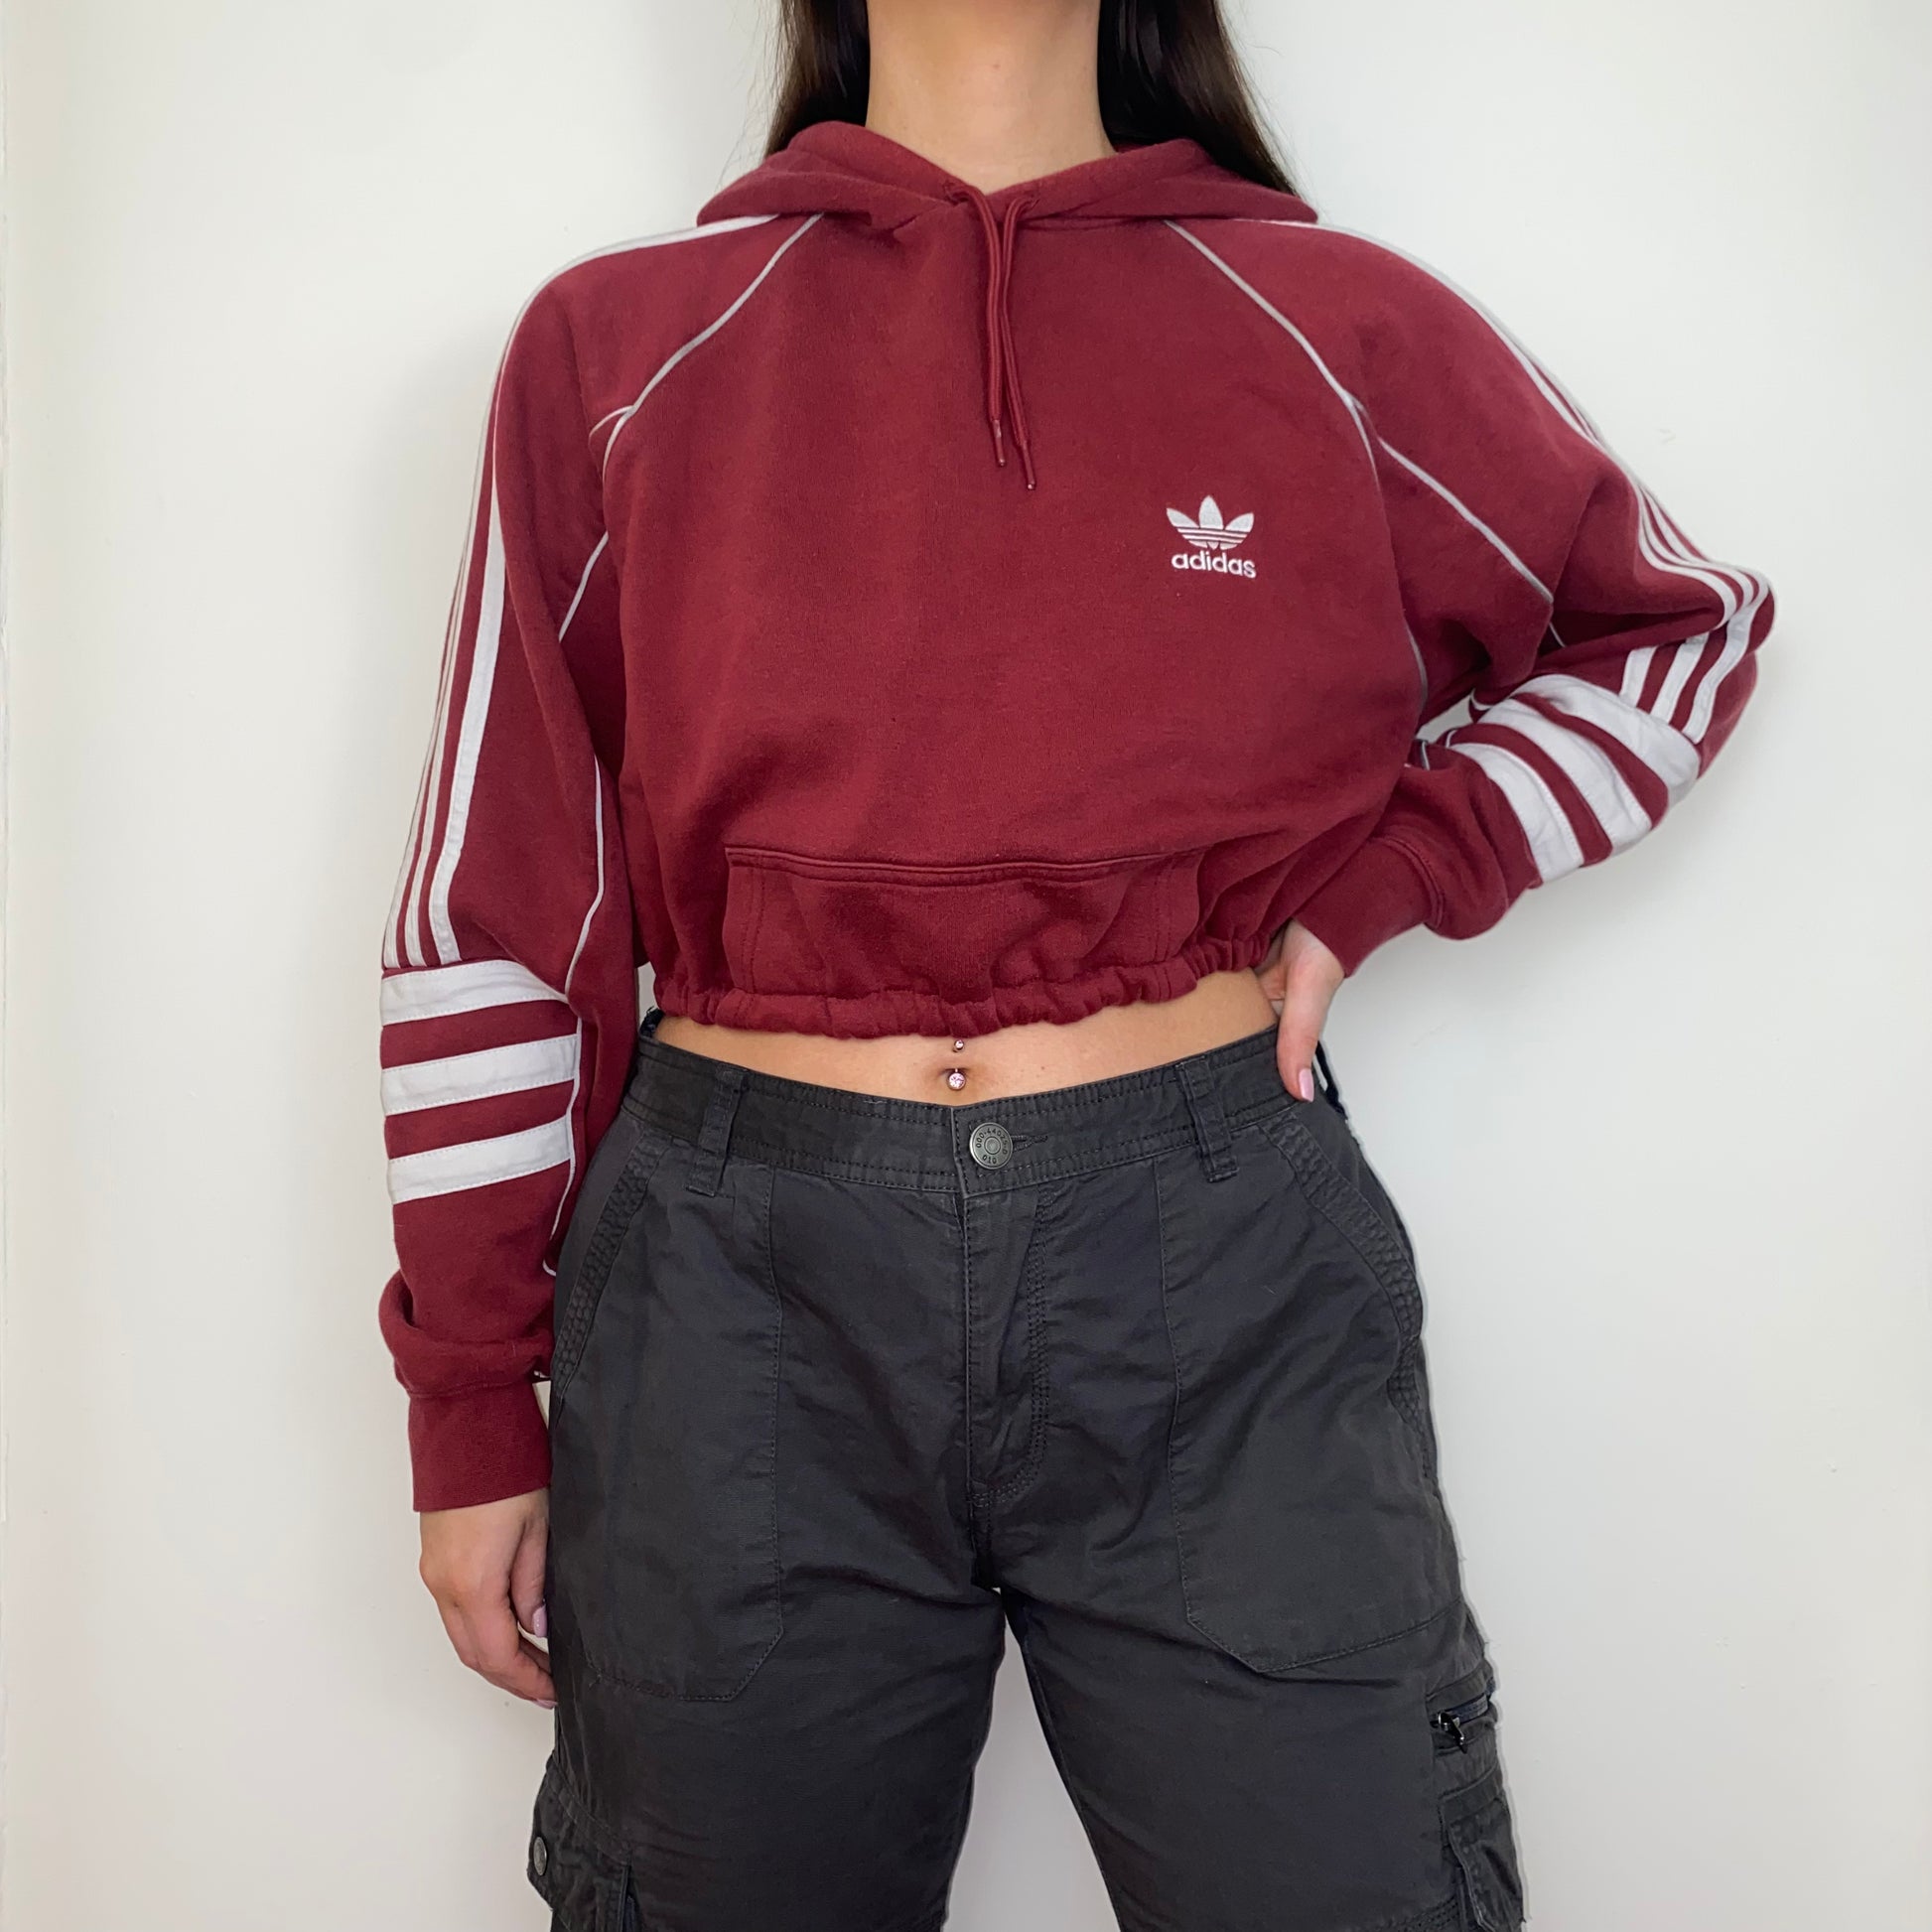 burgundy cropped hoodie with white adidas logo shown on a model wearing grey cargos